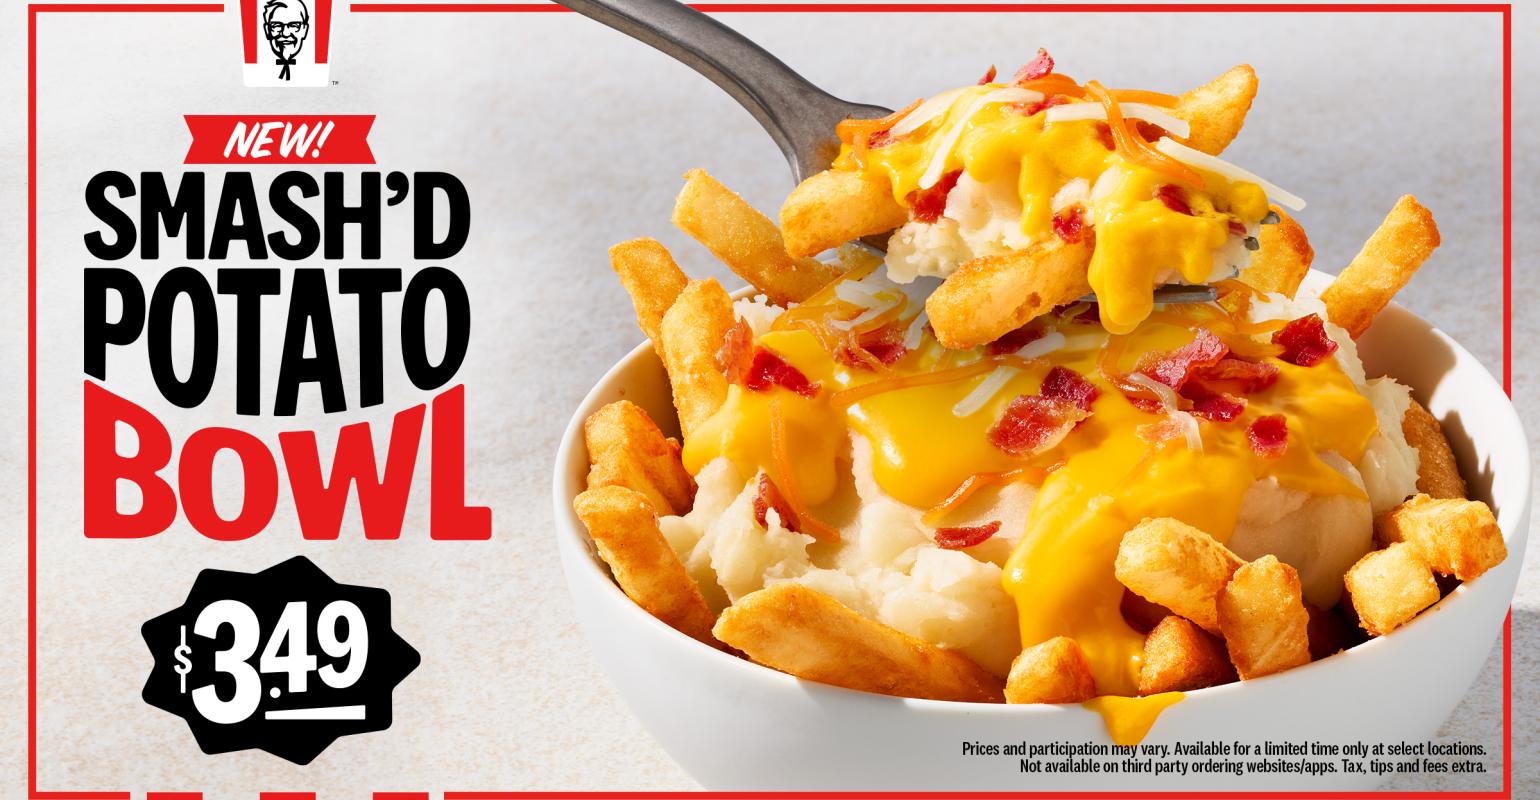 Kfc Tests A New Bowl As It Focuses On Attracting Younger Consumers Nations Restaurant News 